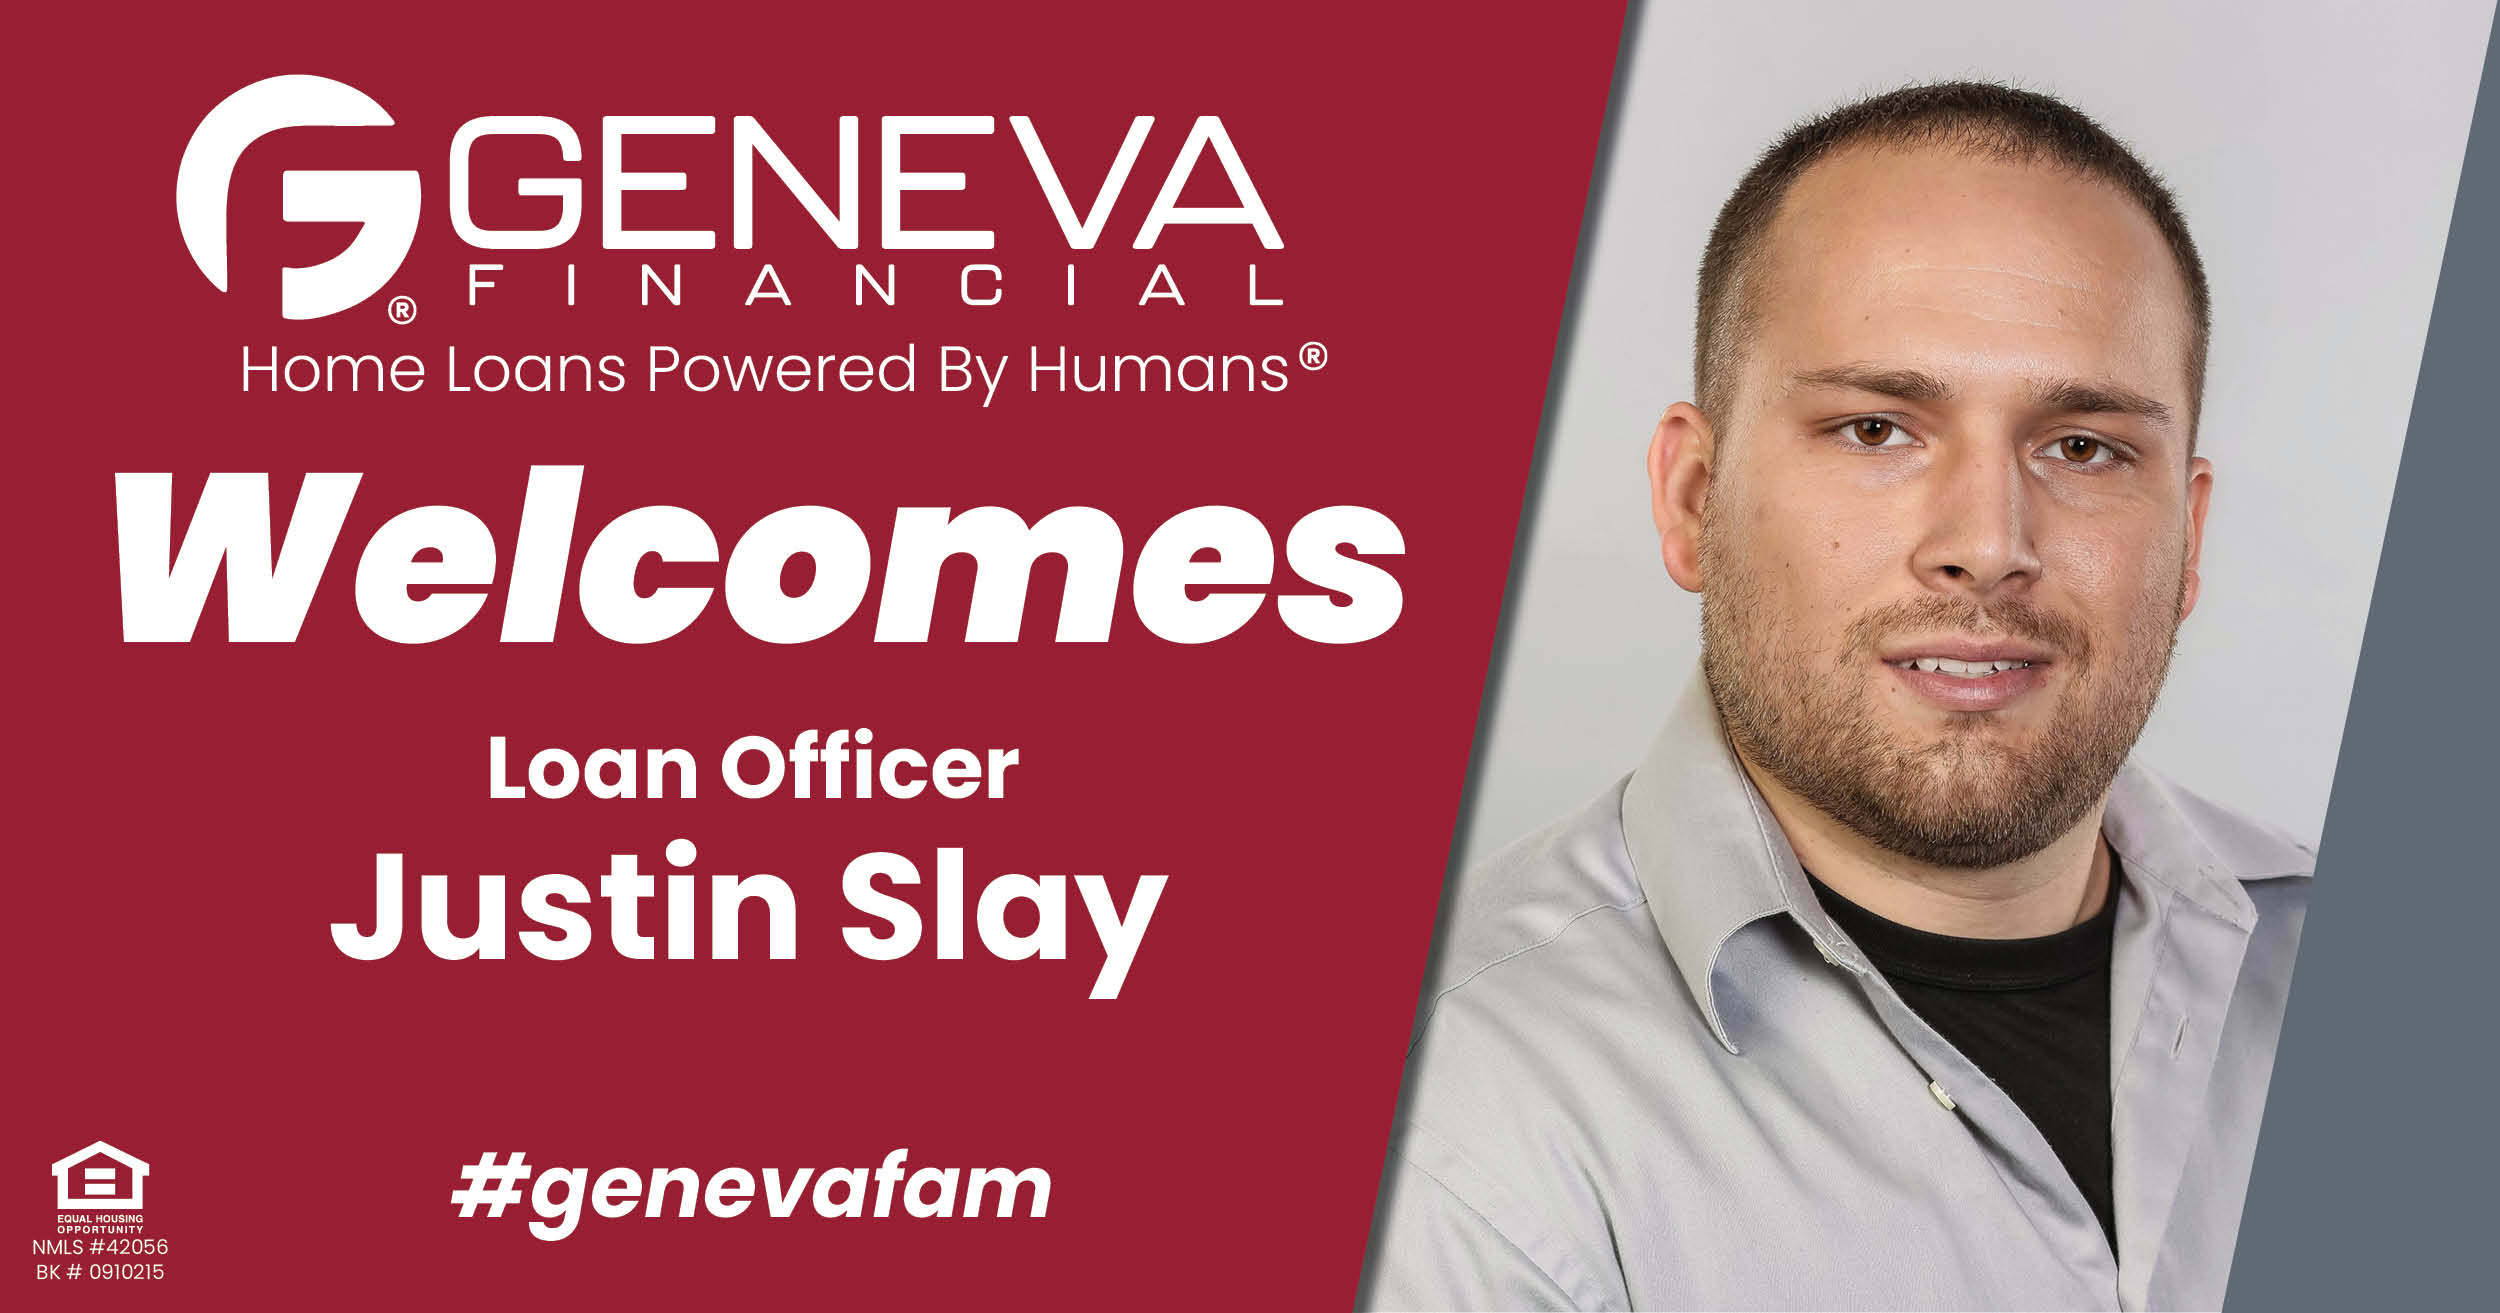 Geneva Financial Welcomes New Branch Manager Justin Slay to Hartwell, Georgia – Home Loans Powered by Humans®.